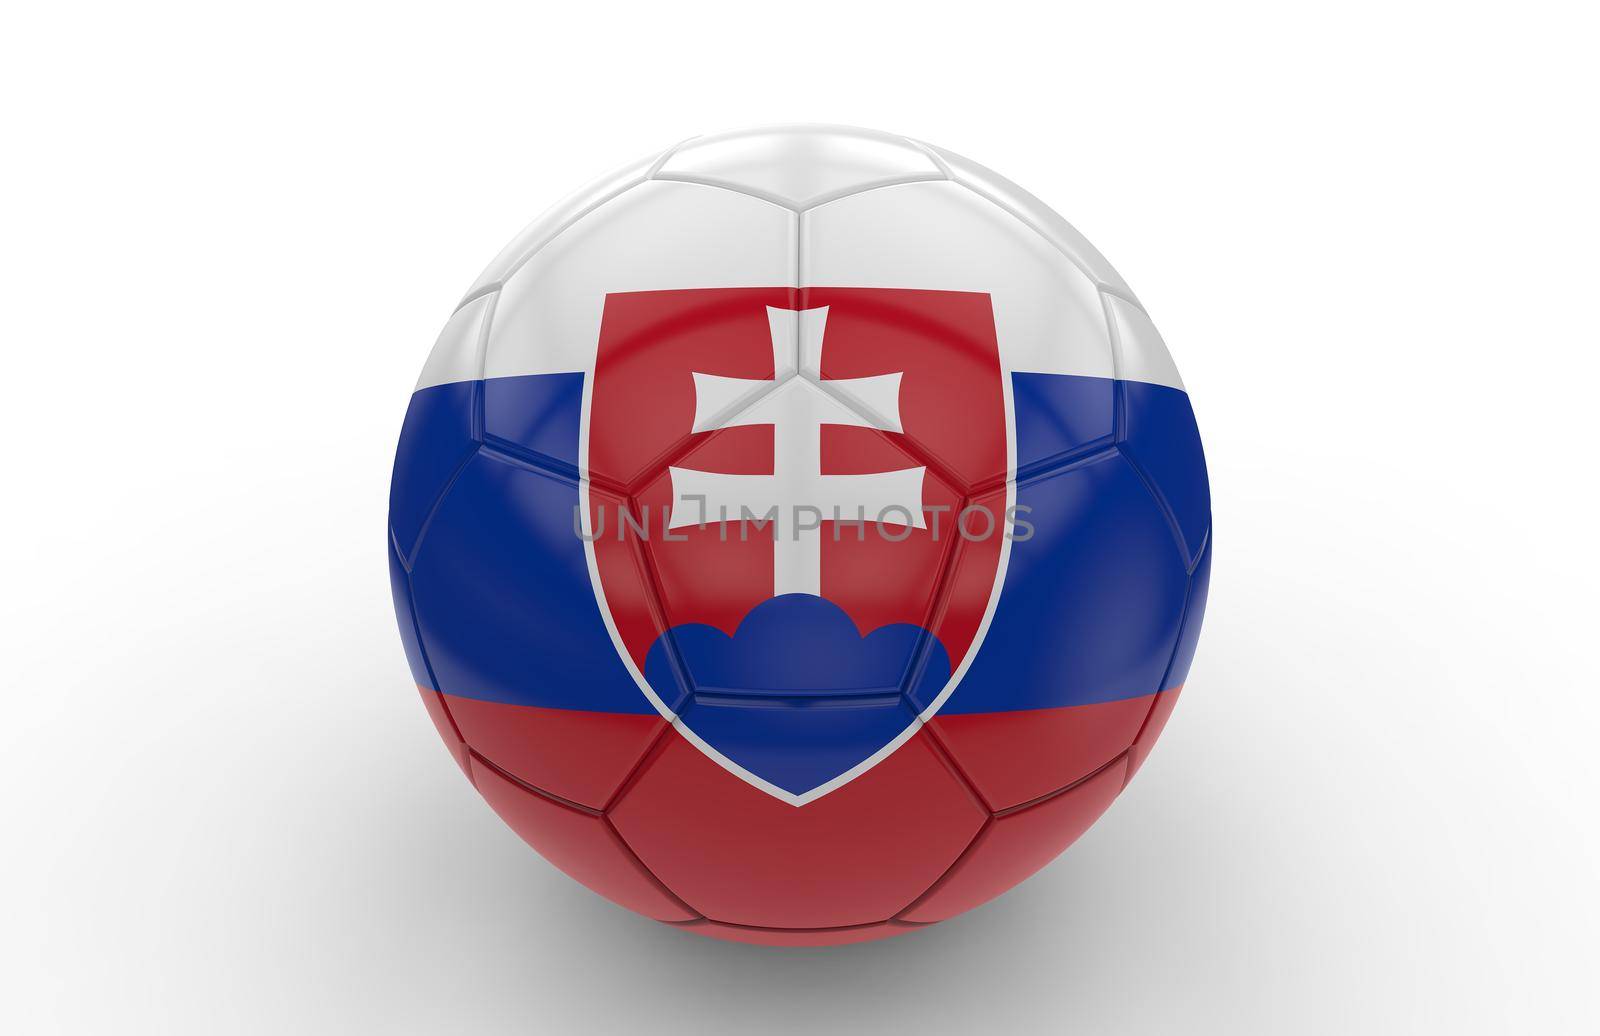 Soccer ball with slovakian flag isolated on white background